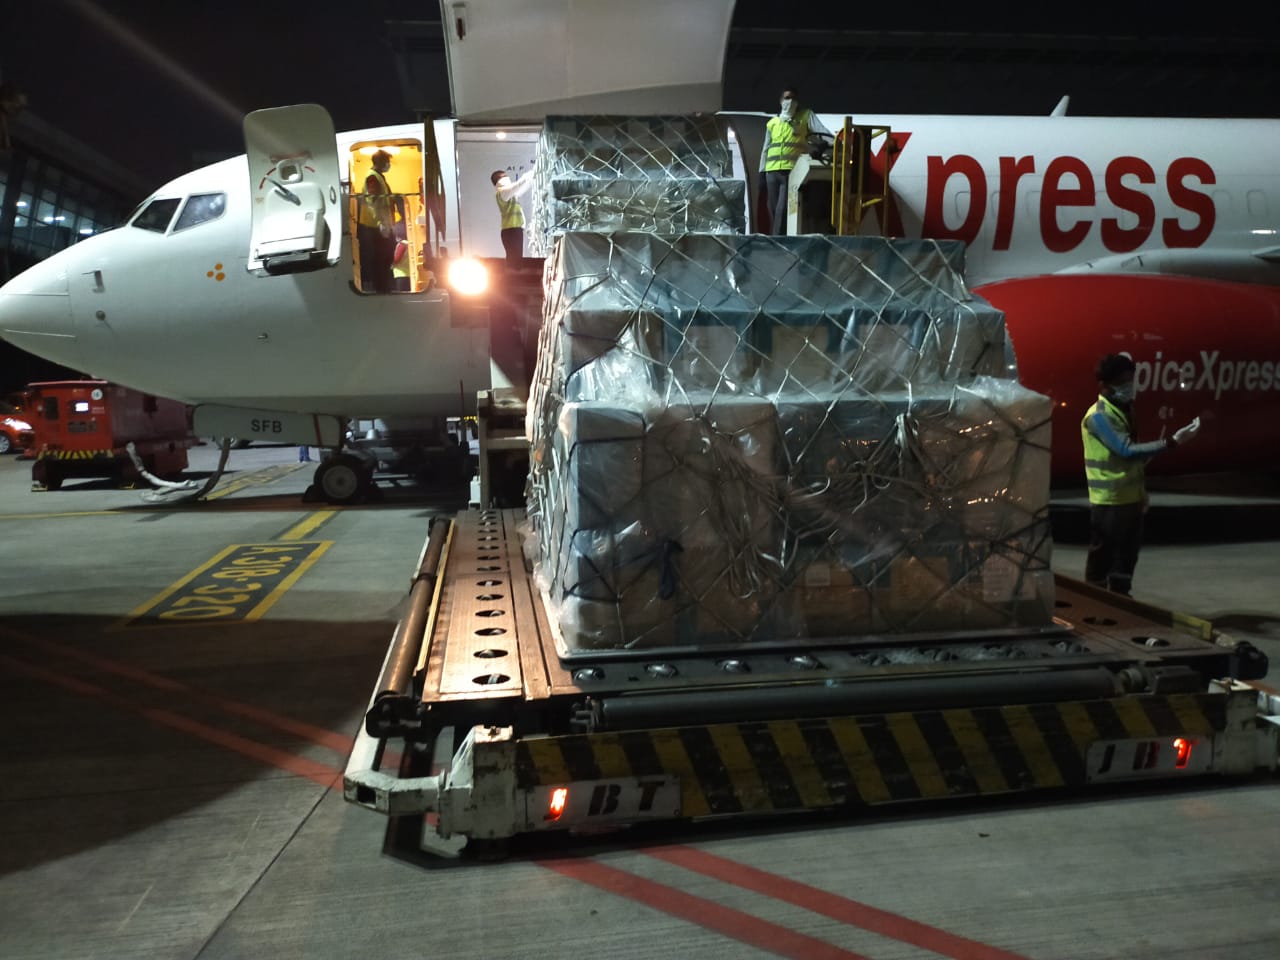 spicejet-carries-14-tons-of-medical-supplies-from-guangzhou-to-delhi